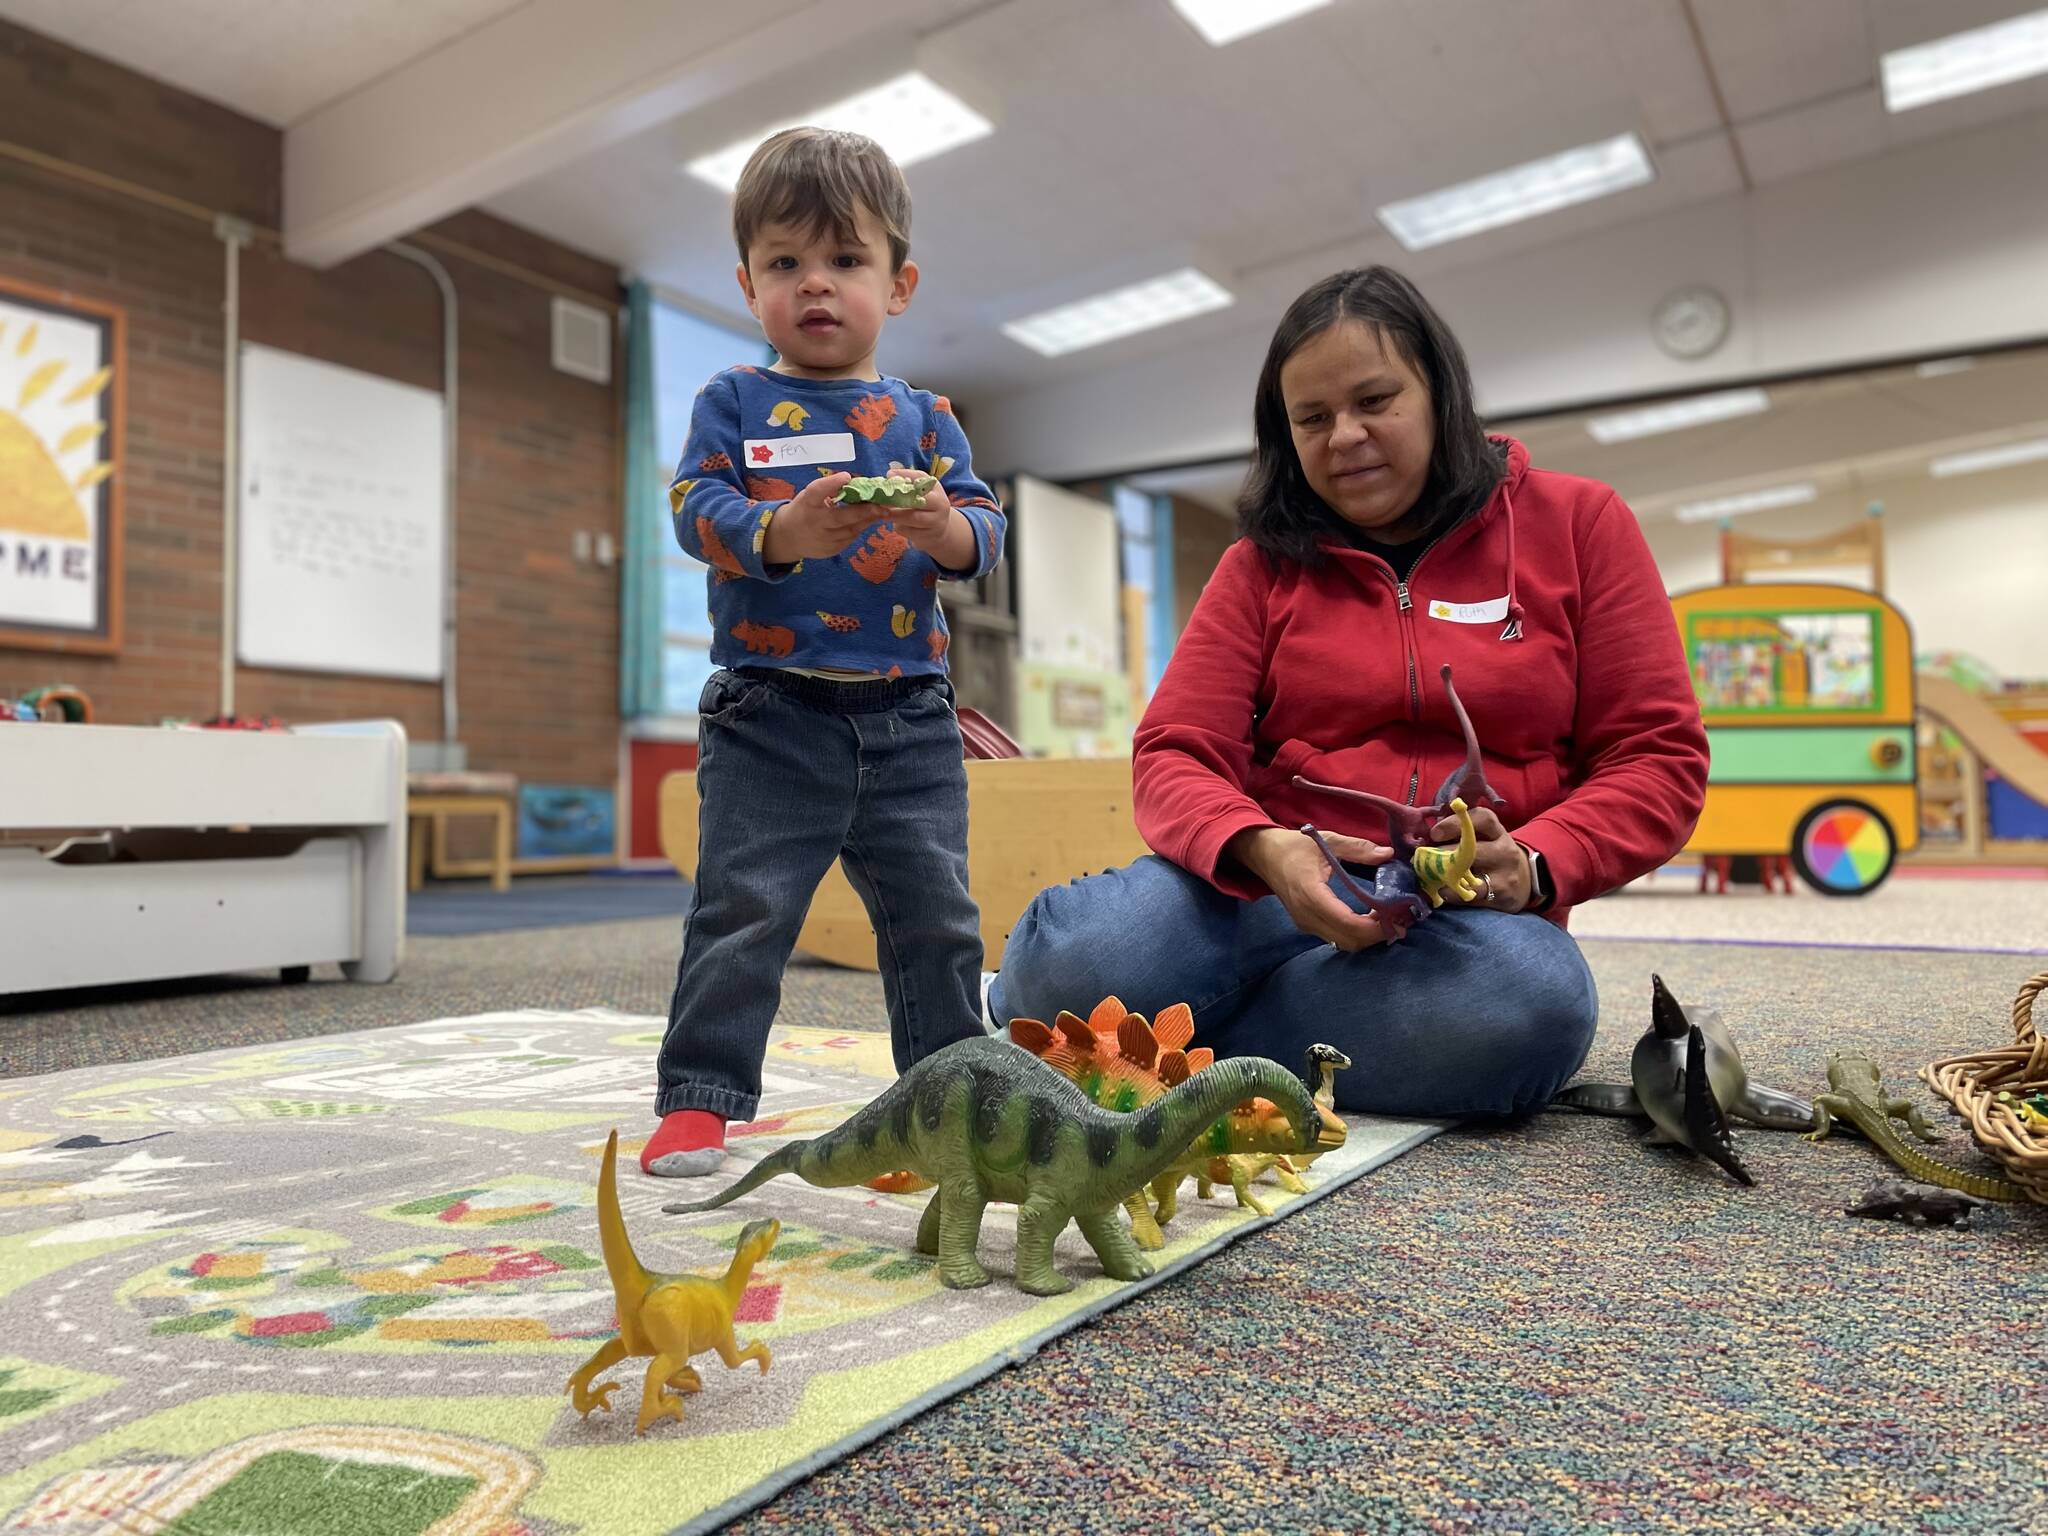 Photo provided
Fen, 18 months, plays with some dinosaurs at Playscape while accompanied by his mom, Ruth Engeset.